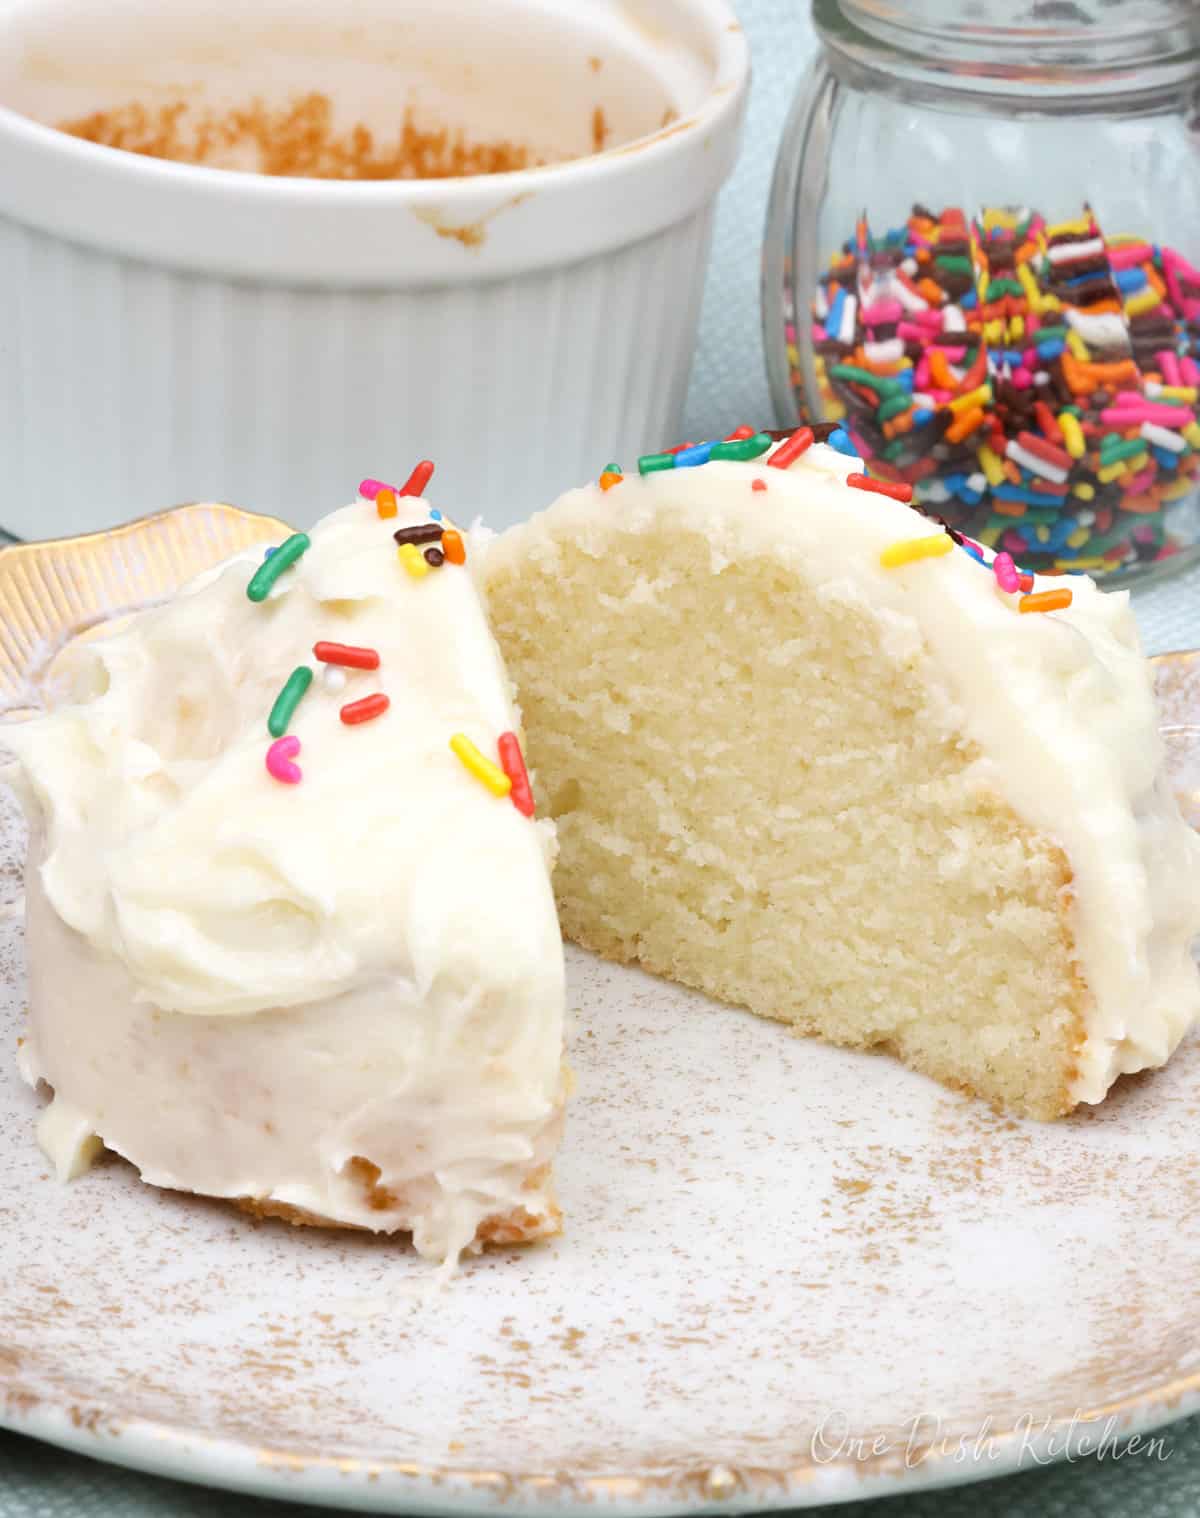 a slice of white cake on a plate next to a jar of sprinkles